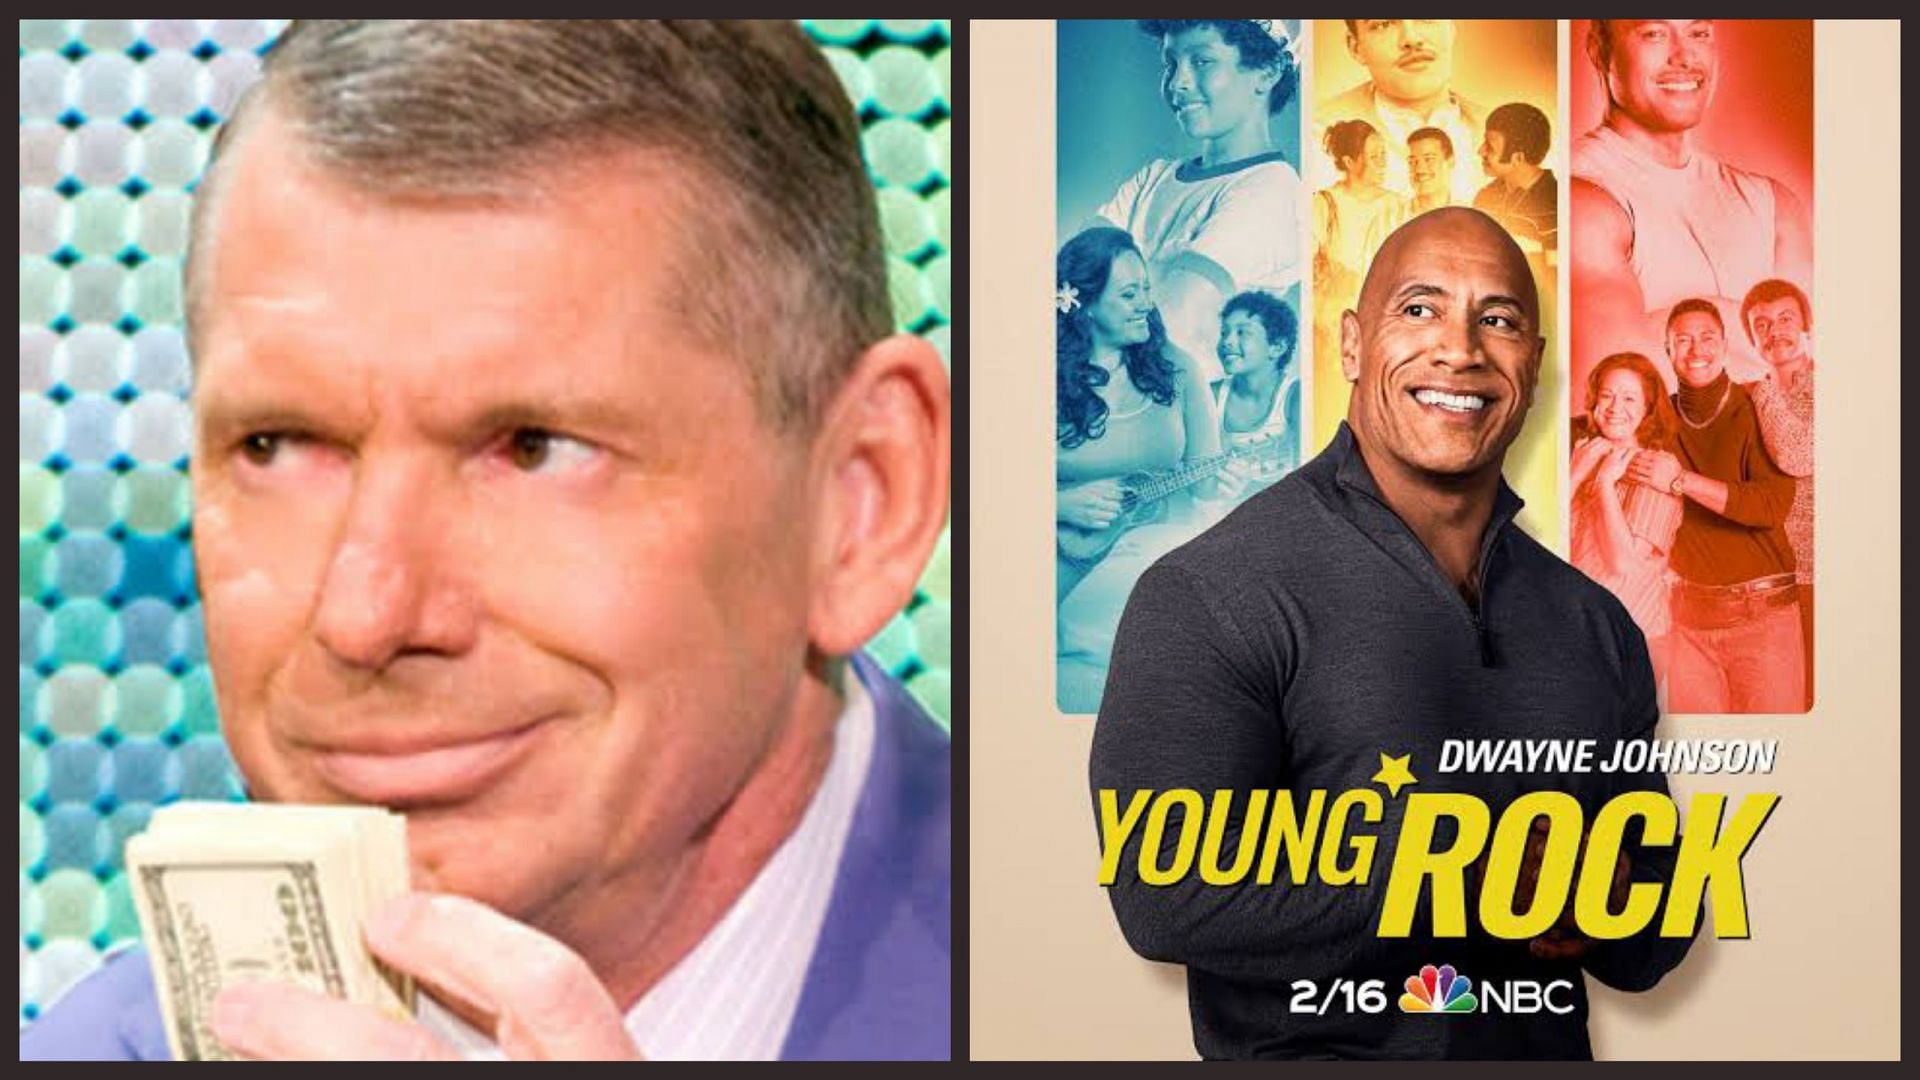 Will Vince McMahon star in the NBC TV sitcom Young Rock?